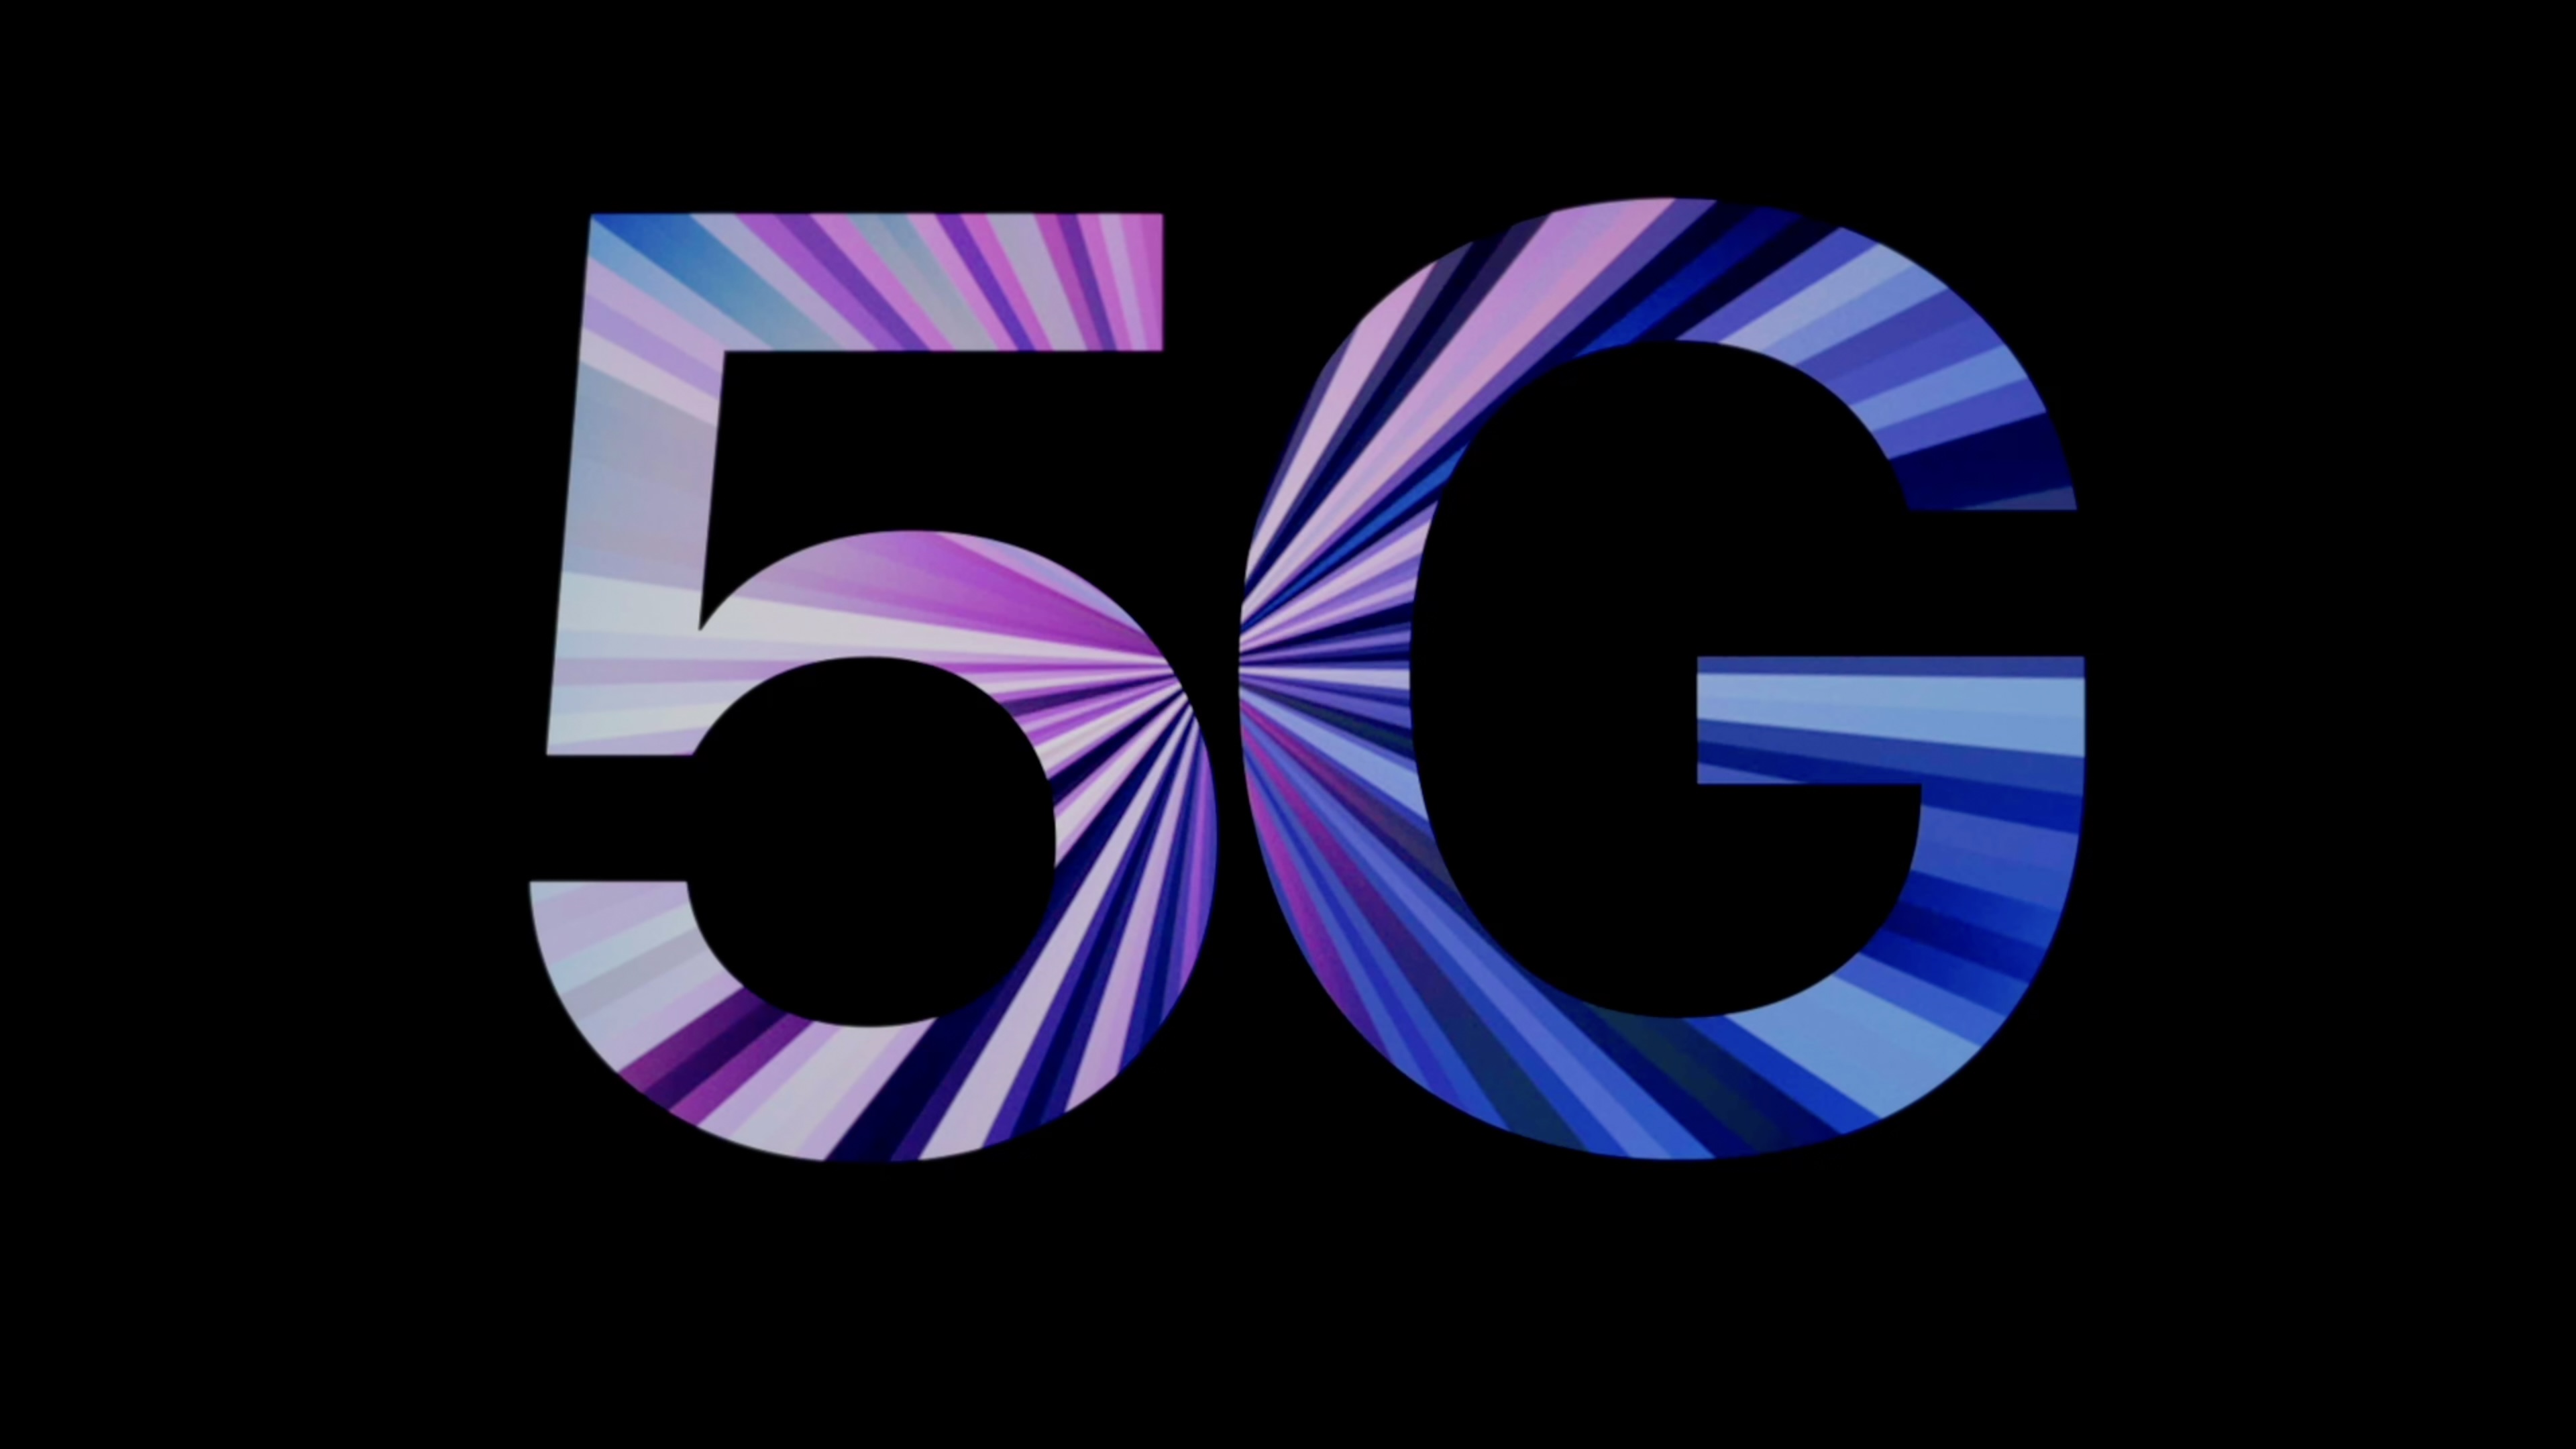 The 10th generation iPad will support 5G.